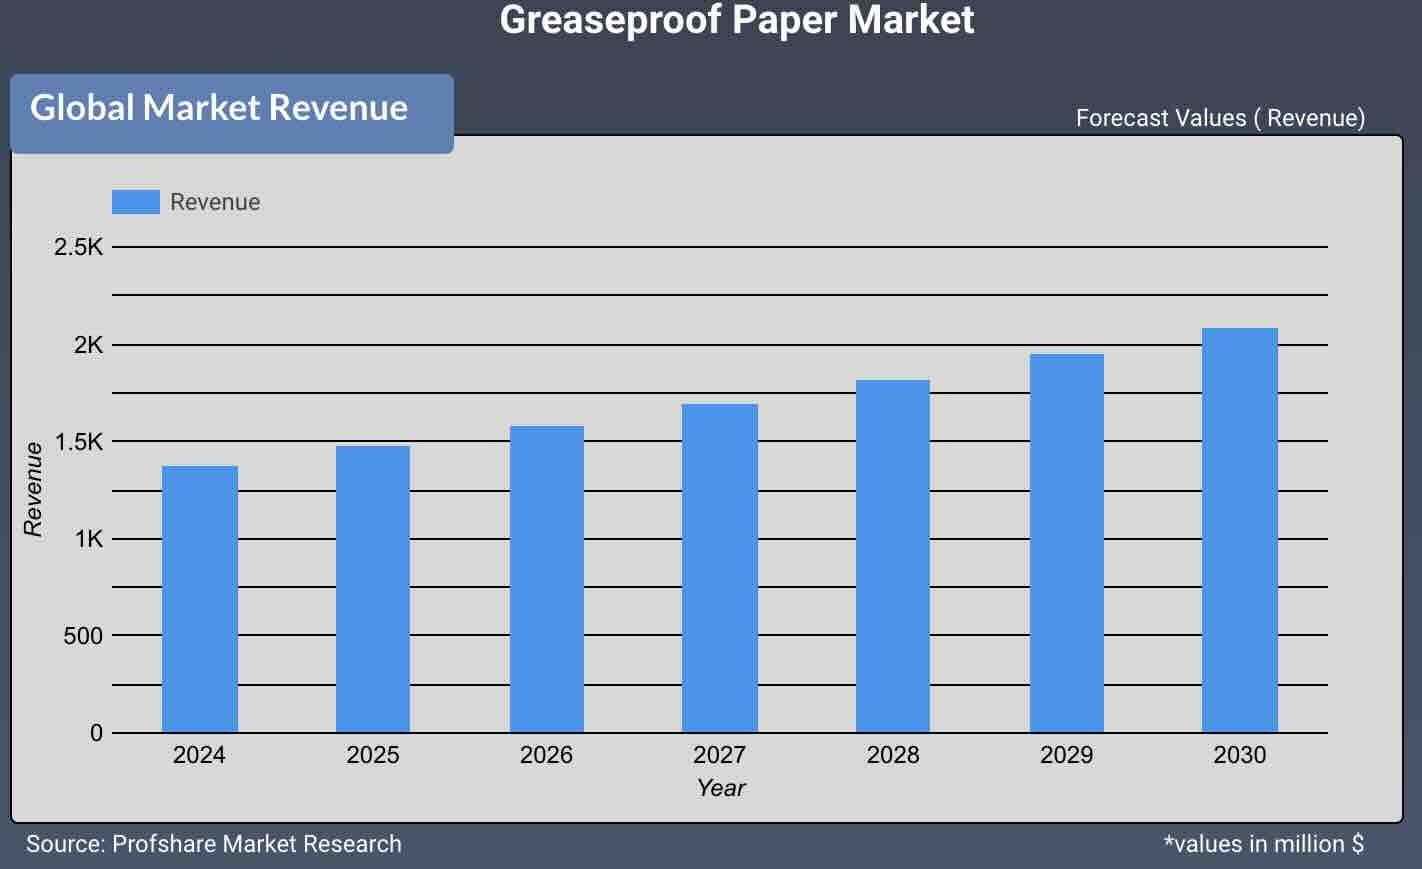 Greaseproof Paper Market 